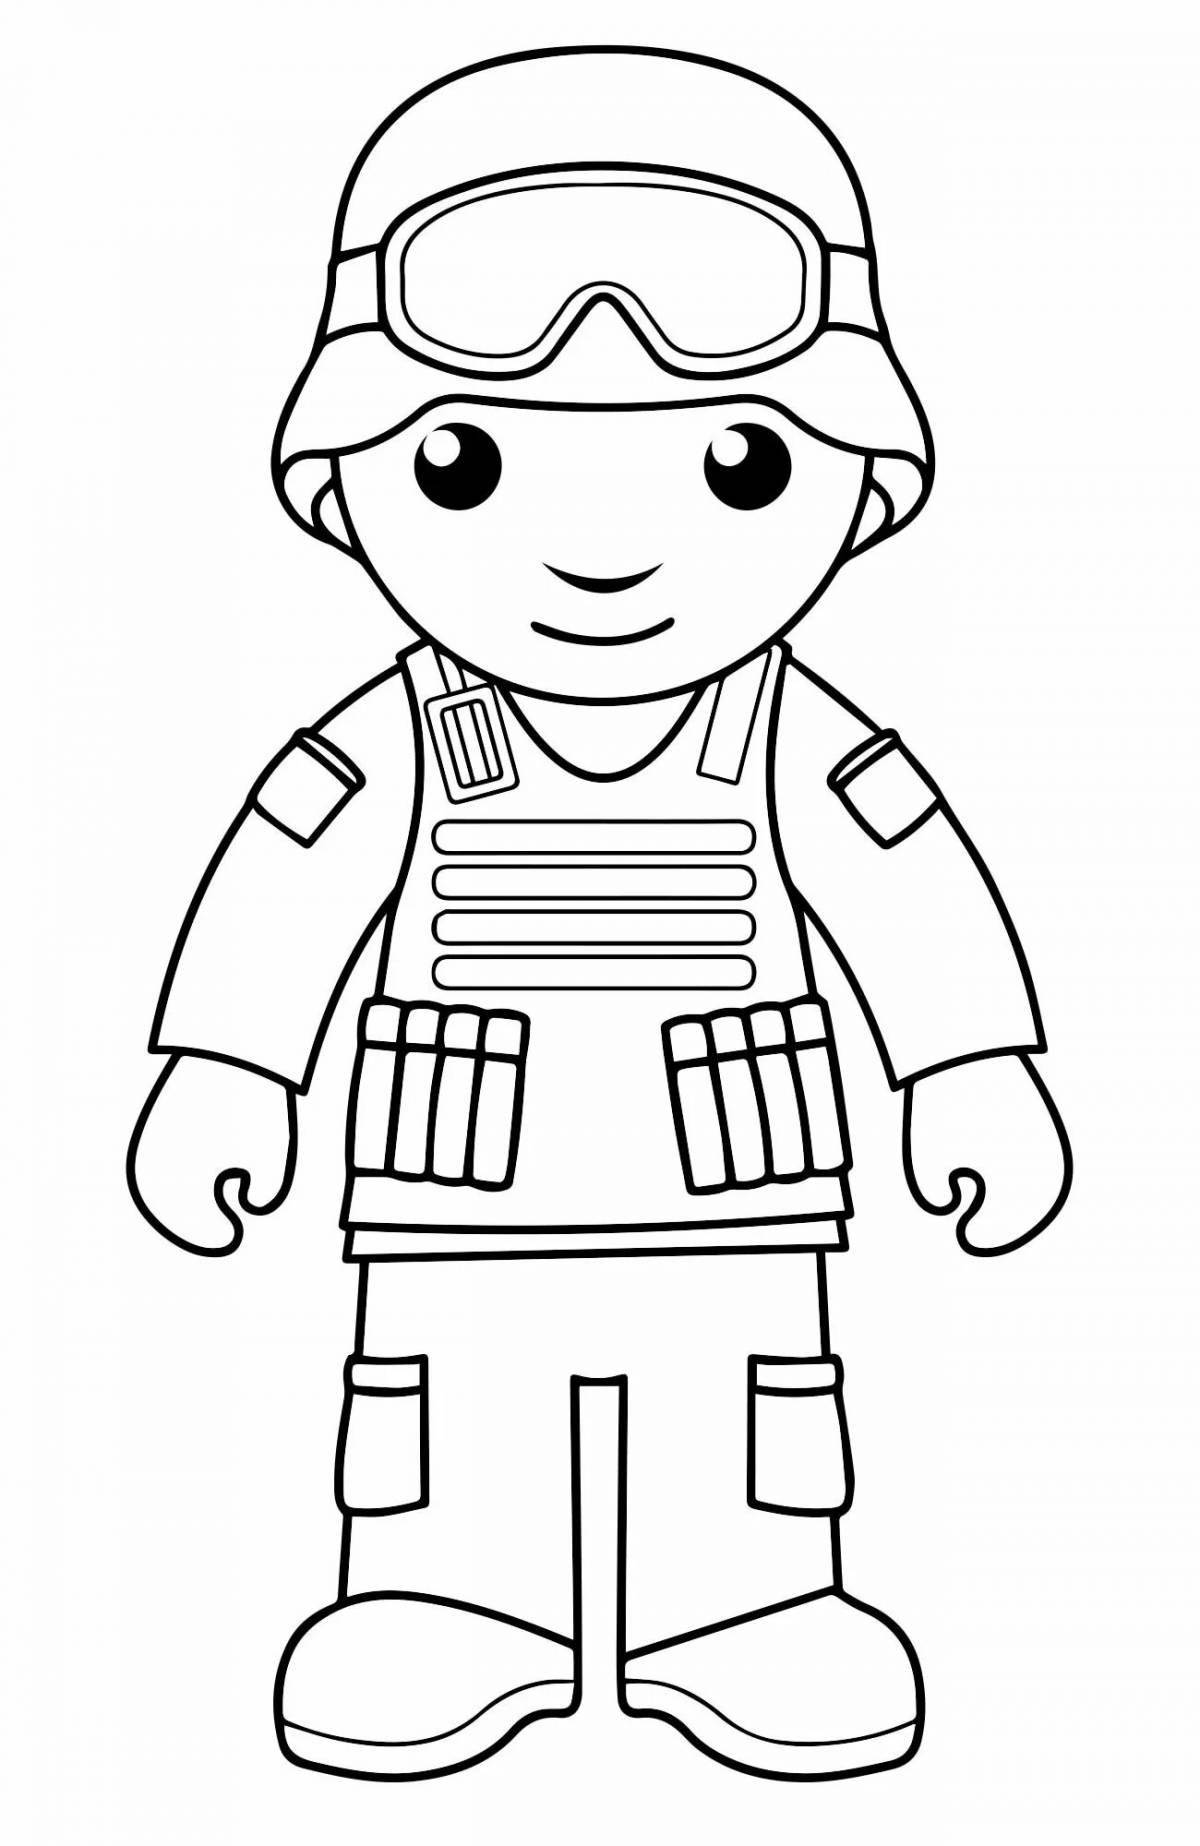 Adorable military coloring book for kids